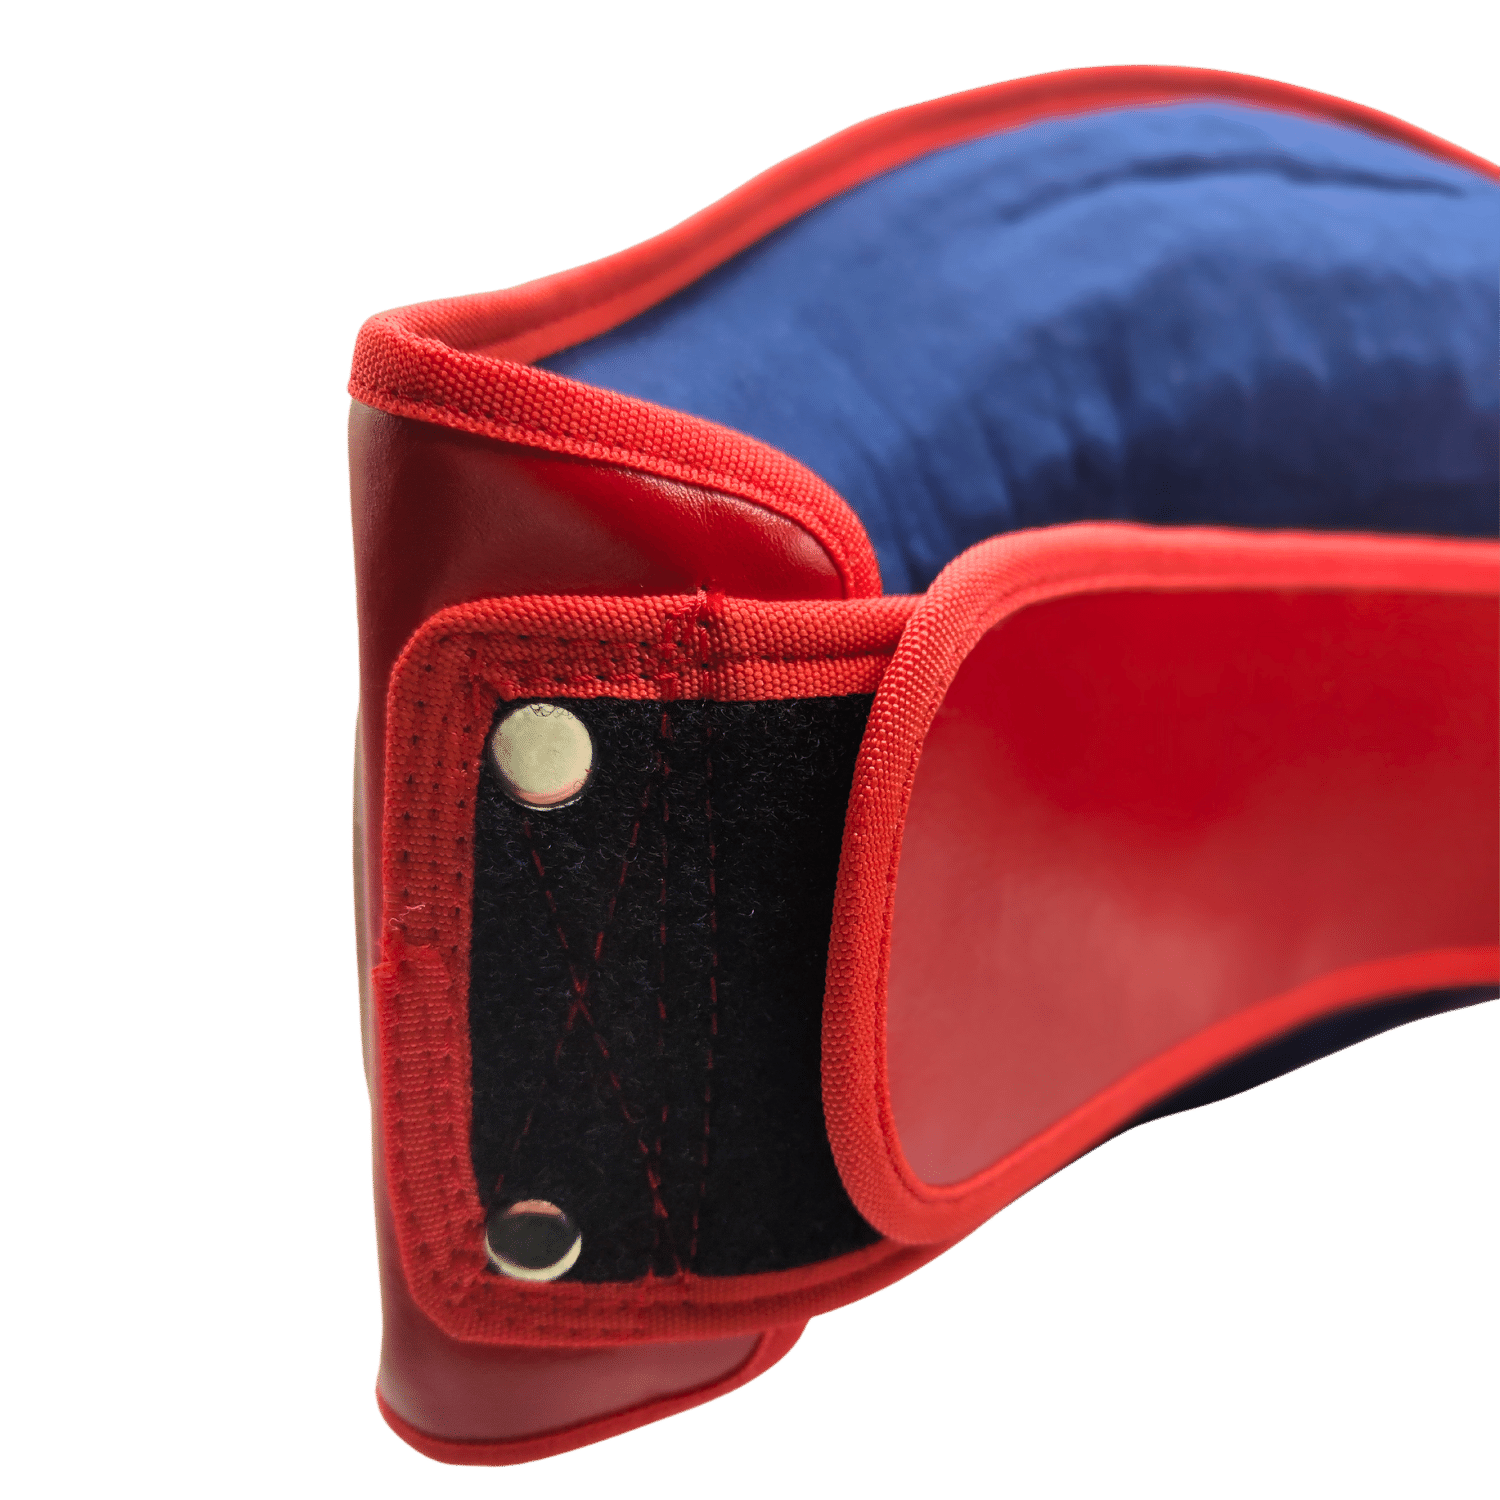 The back of a Muay Thai red and blue boxing belt.